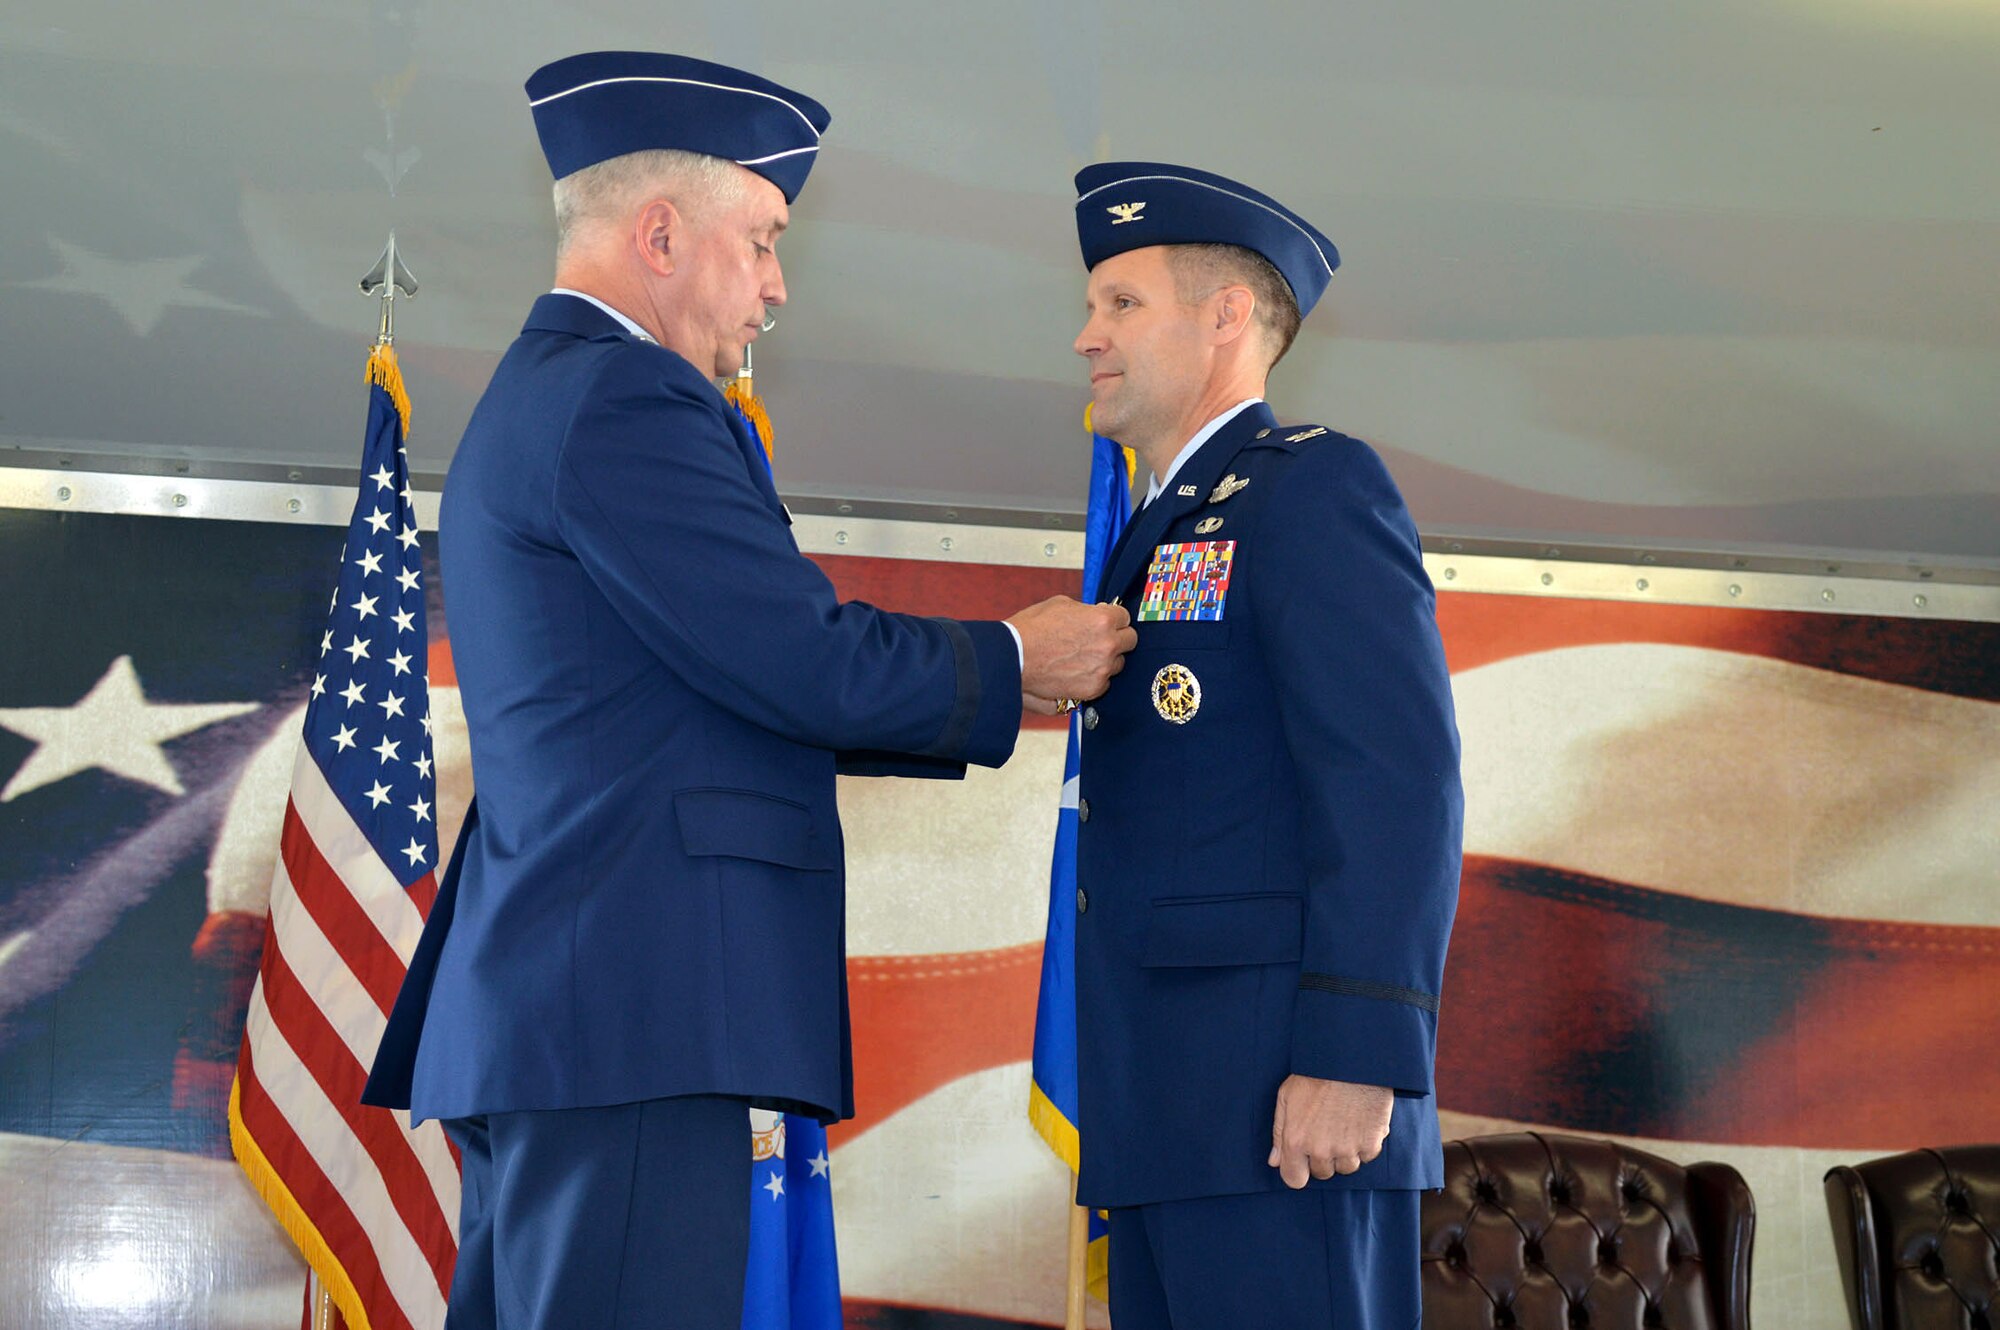 Maj. Gen. Frederick H. Martin, U.S. Air Force Expeditionary Center commander, presents the Legion of Merit medal to Col. Daniel H. Tulley, outgoing 43rd Airlift Group commander, during the group’s change of command ceremony on August 5, 2014 at Pope Army Airfield, N.C. During Tulley’s command, the 43rd AG’s “Gryphons” executed over 4,000 Joint Special Operations Command, Army and Air Force contingency missions with a 99 percent departure reliability rate. Tulley has commanded the 43rd AG since July 2012 and moves on to his next assignment as commander of the 6th Air Mobility Wing, MacDill Air Force Base, Fla. (U.S. Air Force photo/Marvin Krause)